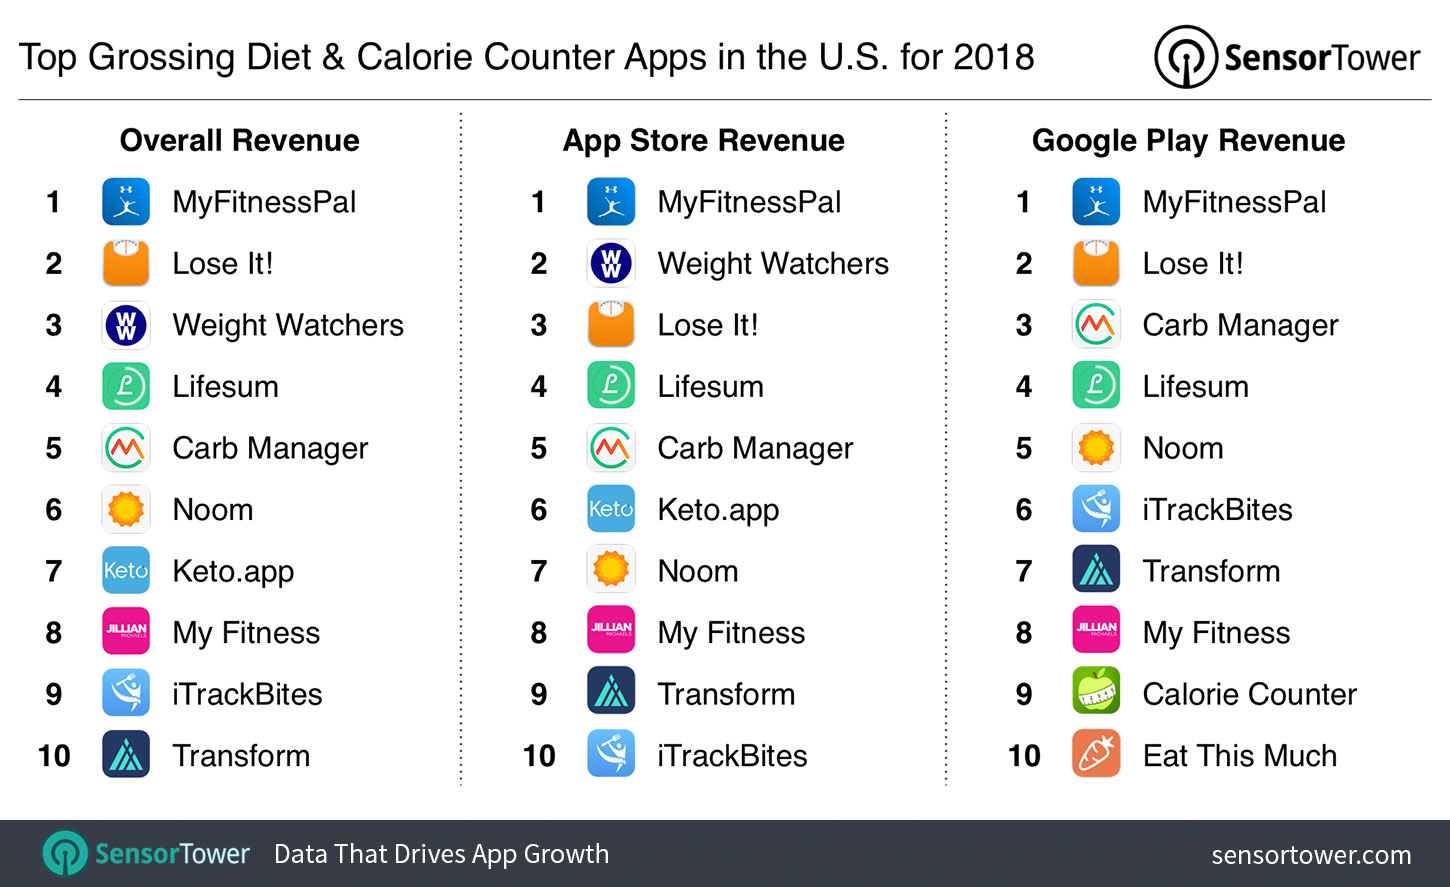 Top Diet and Calorie Counter Apps in the U.S. for 2018